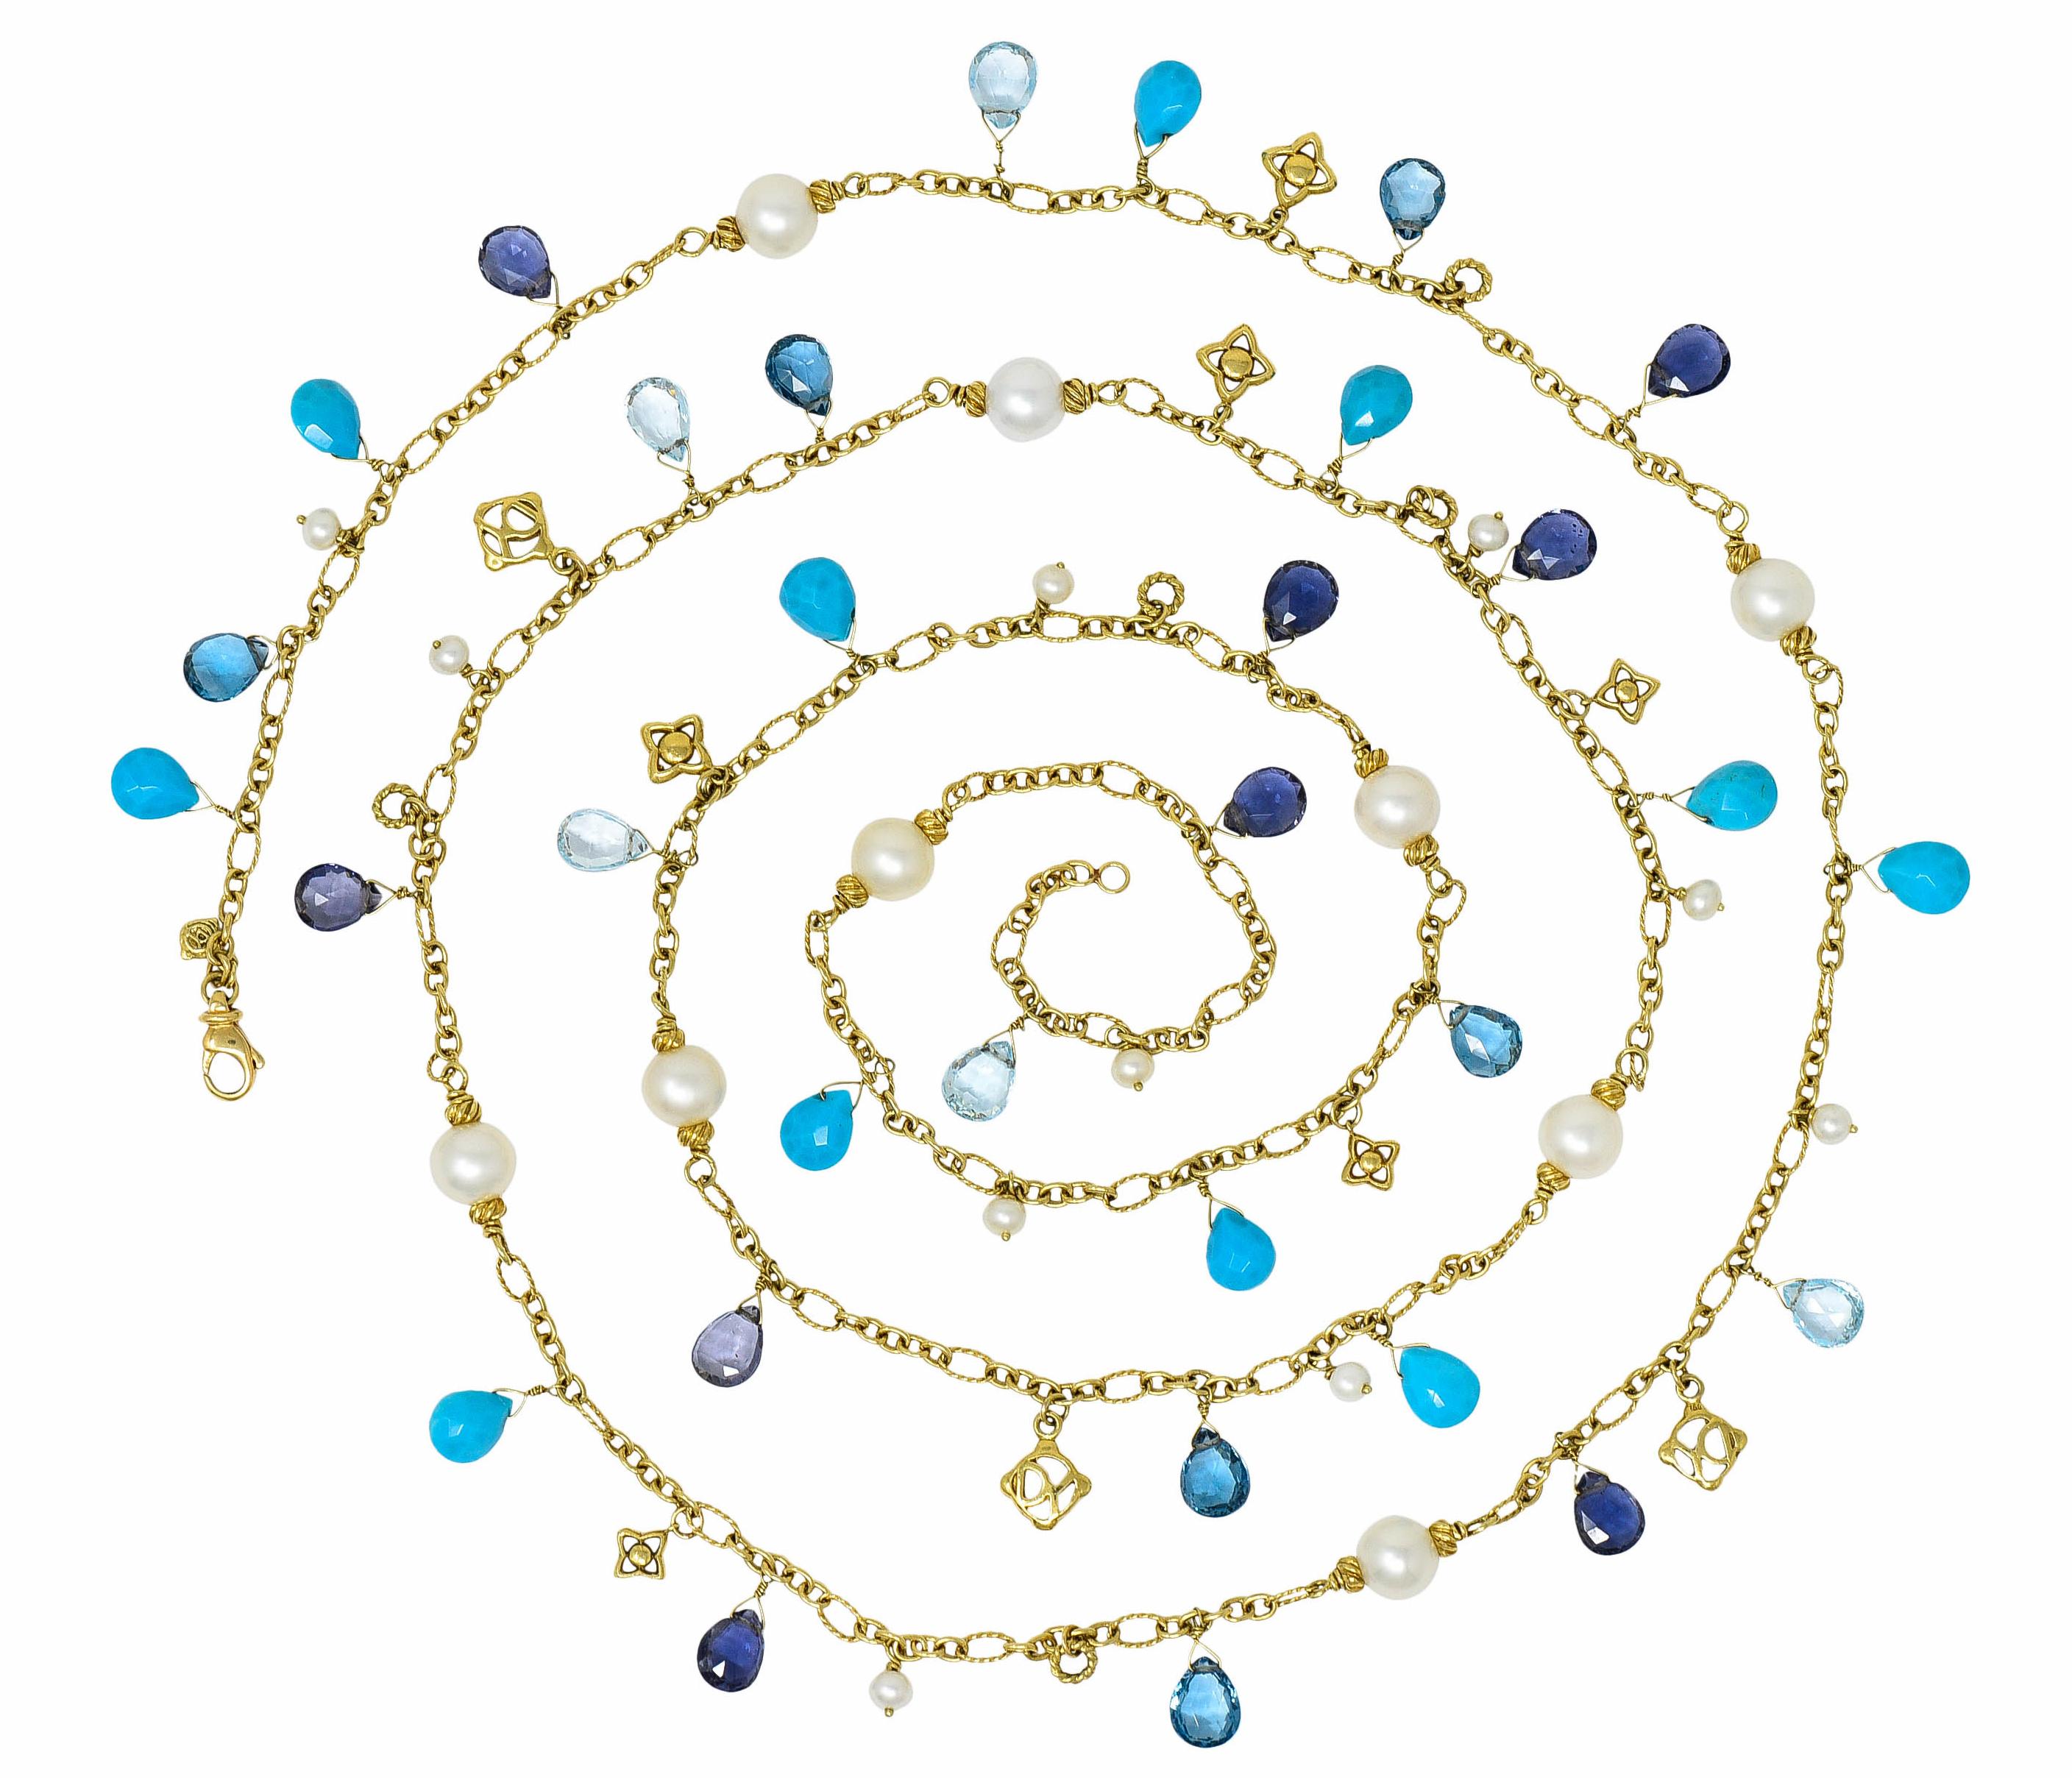 Necklace is comprised of stylized twisted cable links alternating with smoothly polished links

With round pearl stations measuring from 8.3 to 8.7 mm - white in body color with very good luster

Featuring briolette cut drops of iolite, turquoise,